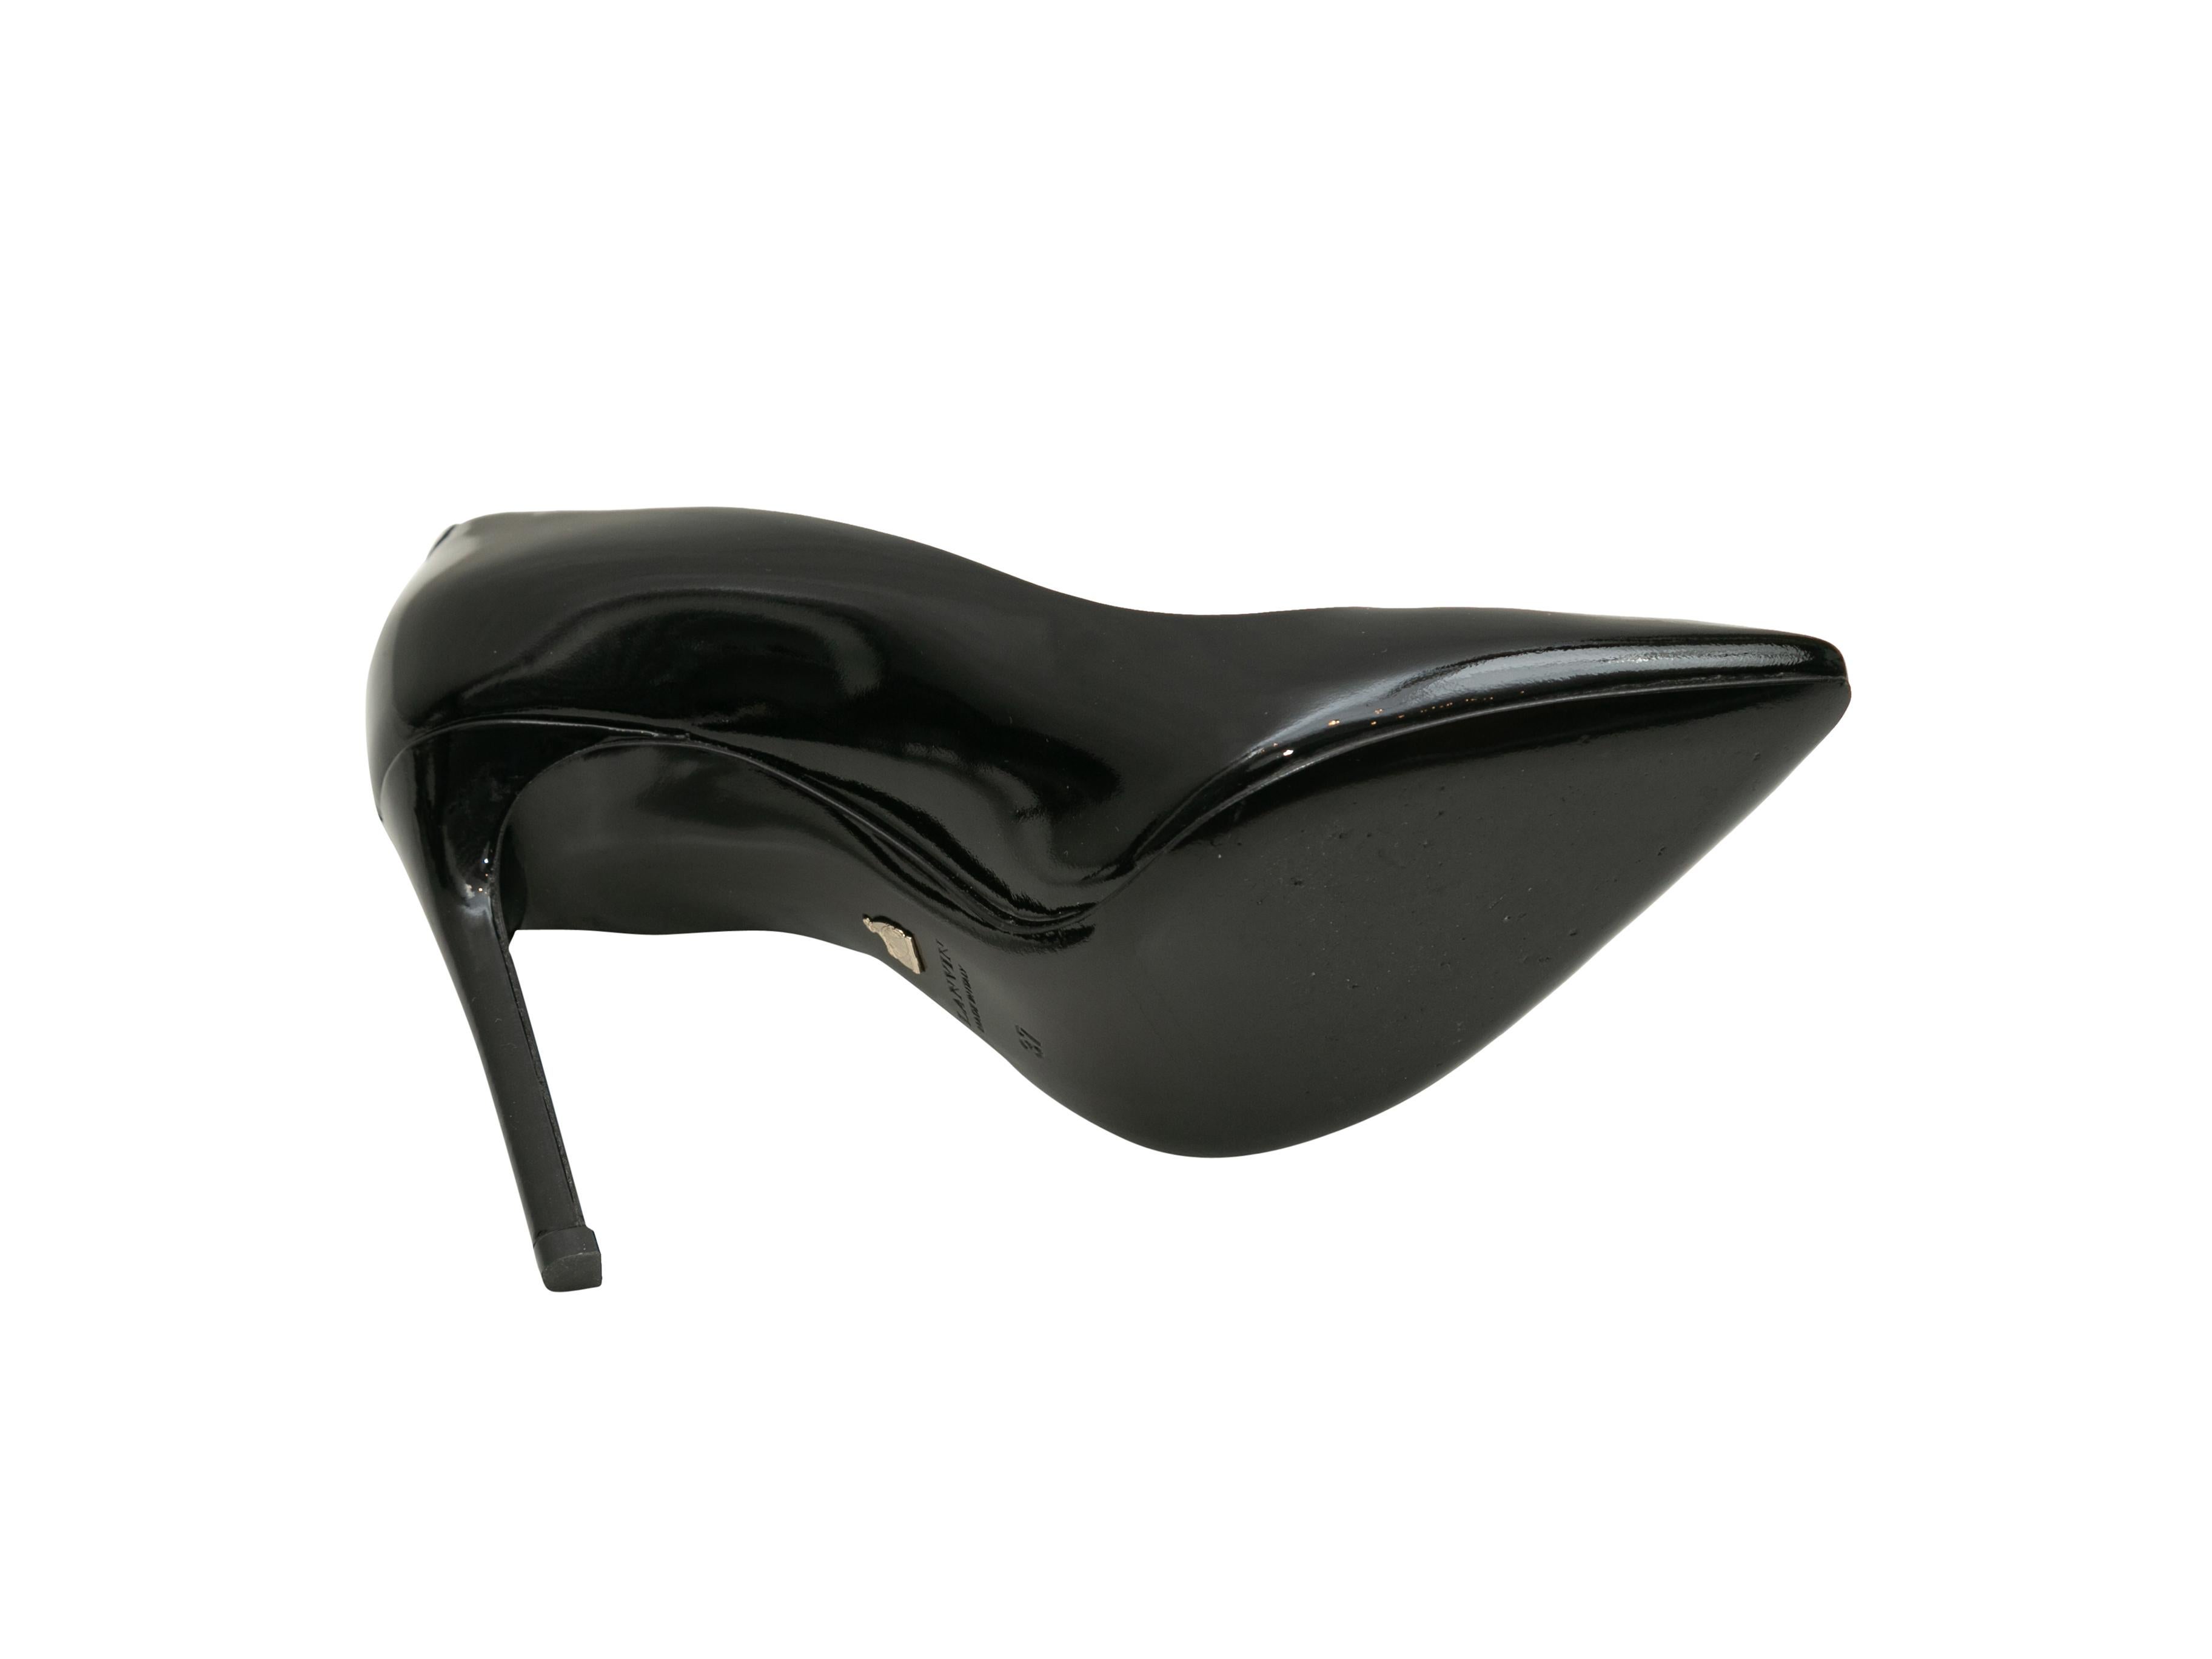 Product details: Black patent leather pointed-toe pumps by Lanvin. 4